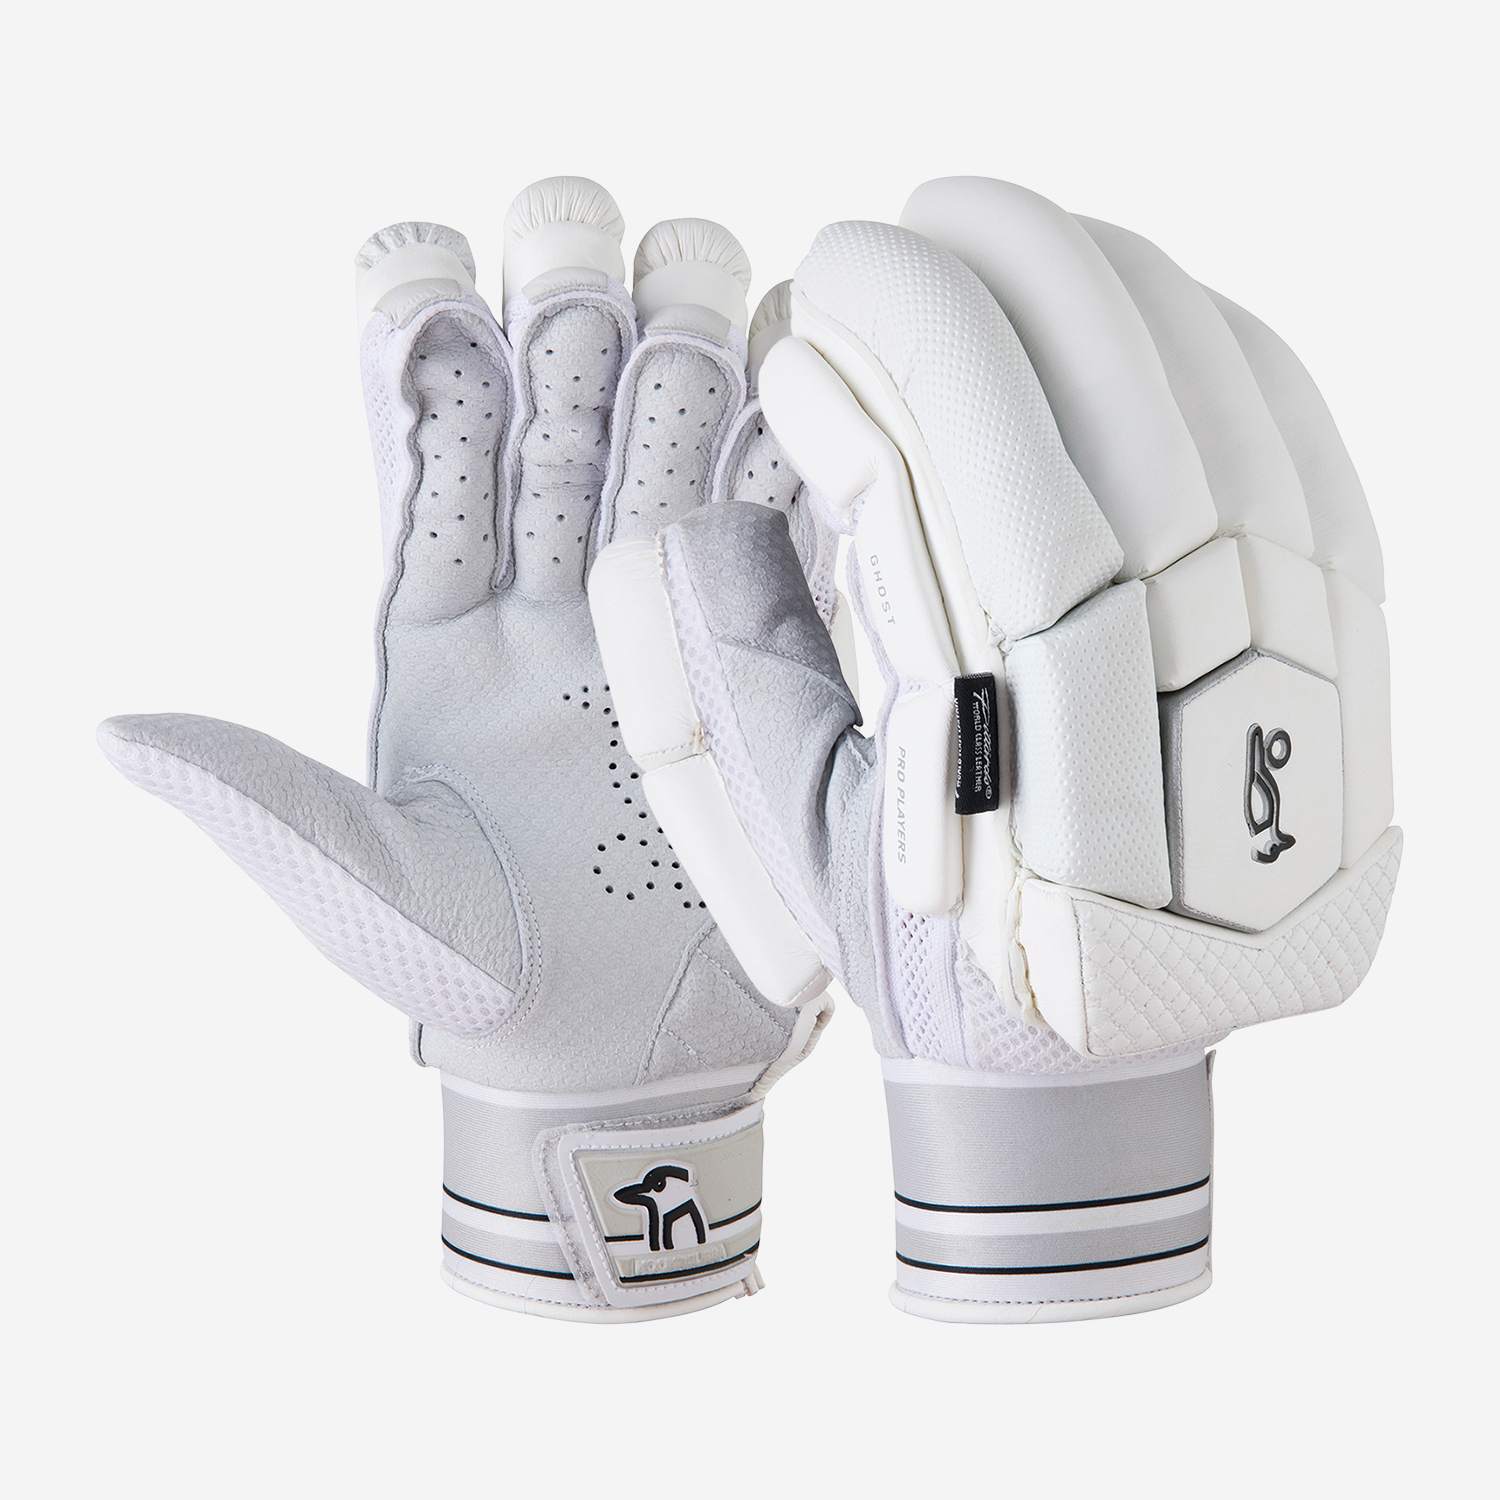 KOOKABURRA Unisexs 2020 Ghost Pro Batting Gloves Small Adult Right Hand White 